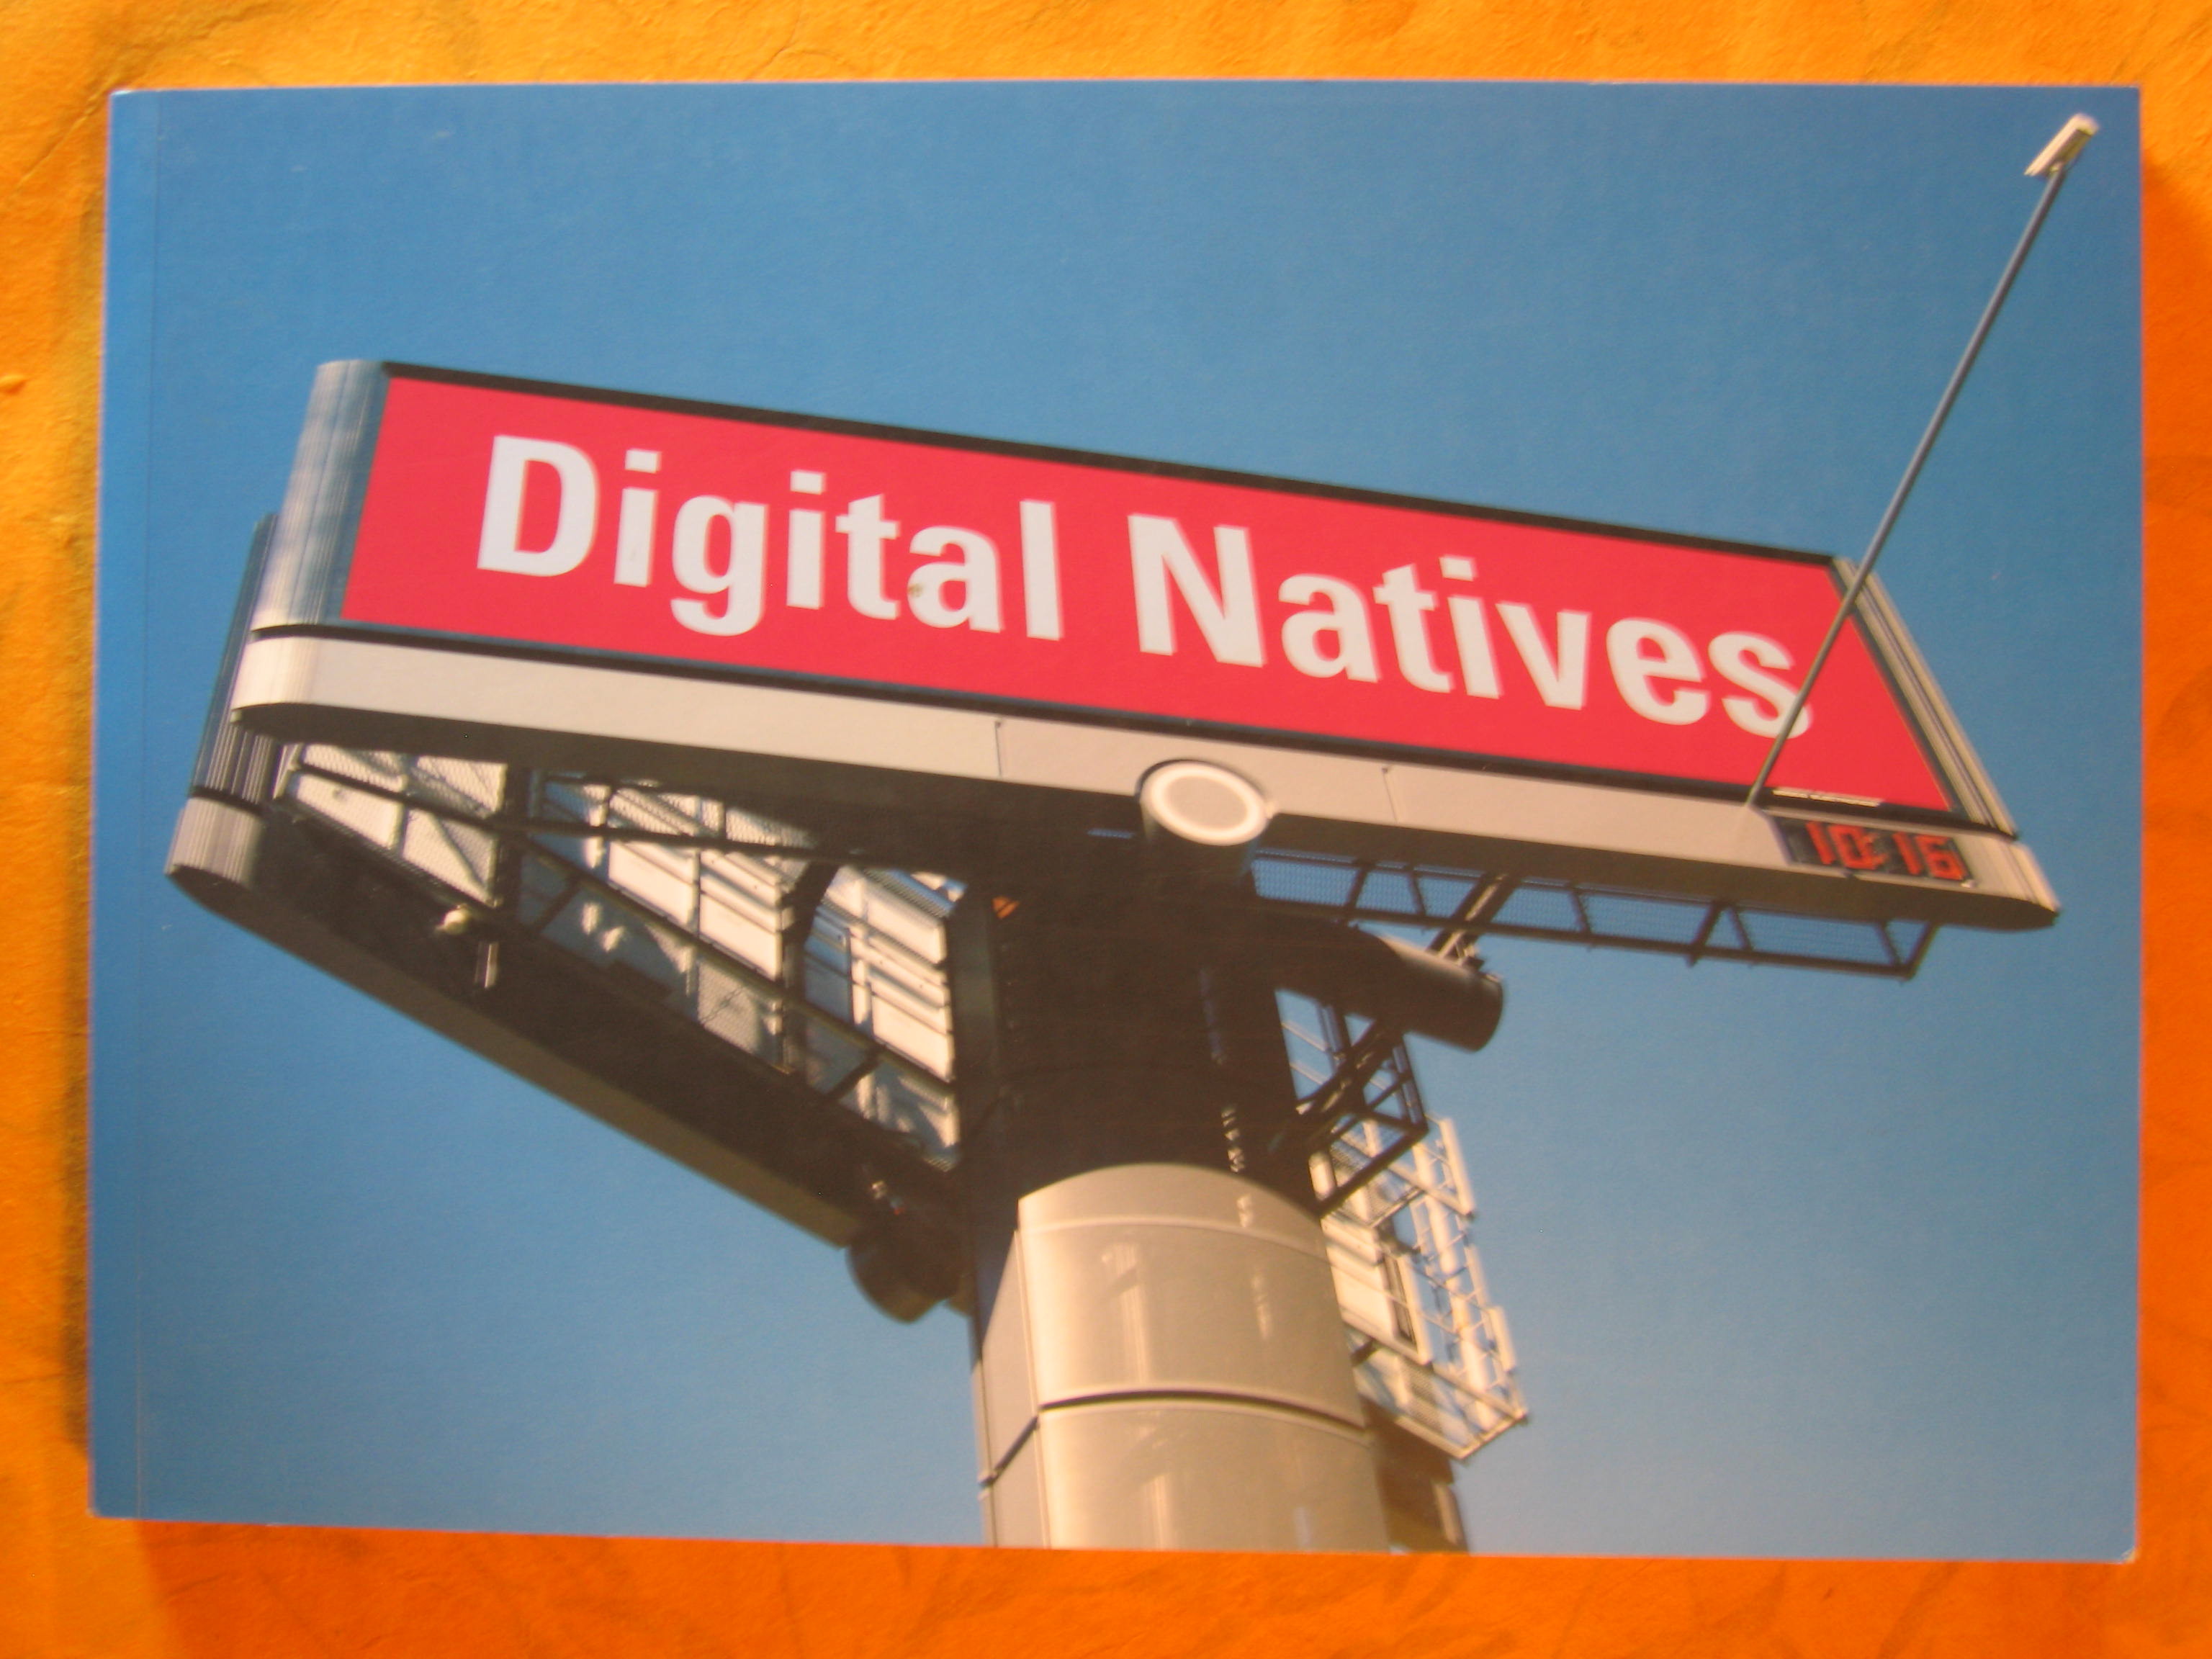 Image for Digital Natives: Other Sights for Artists' Projects